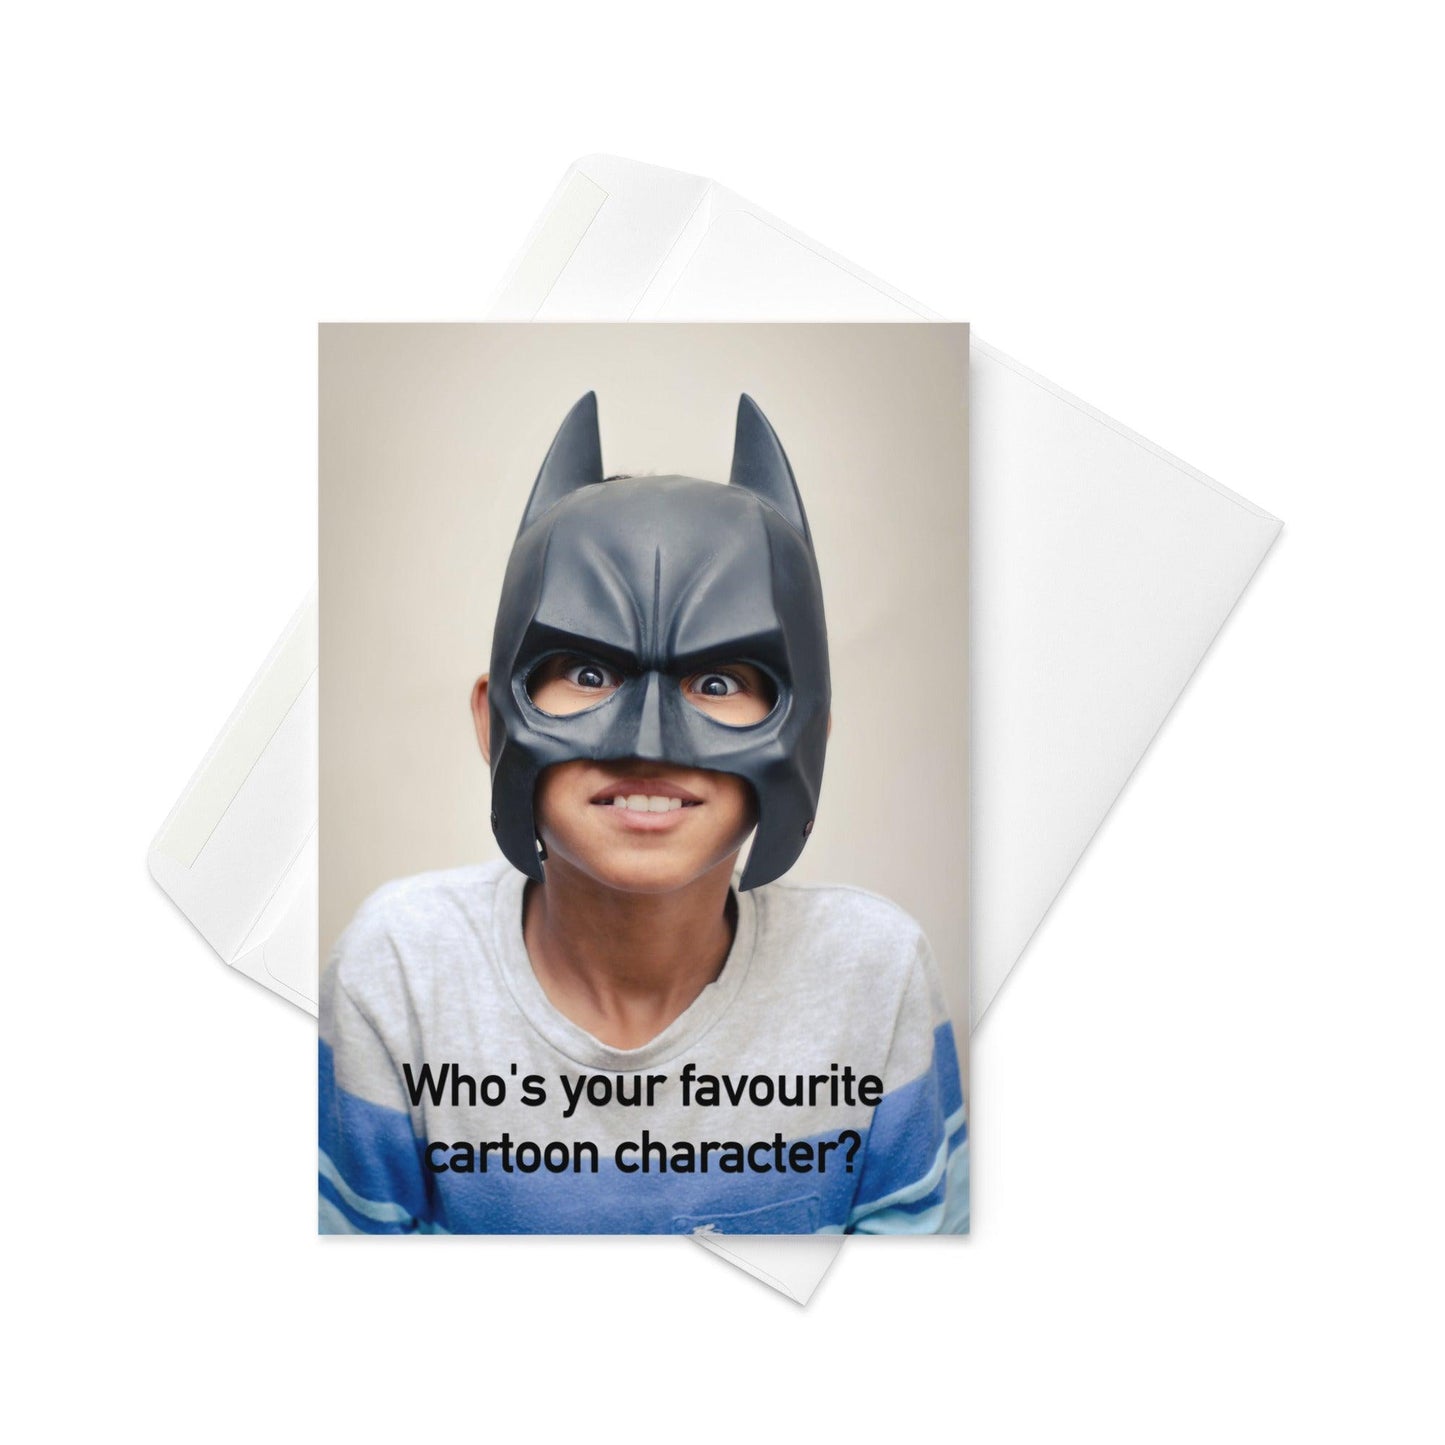 Who’s Your Favourite Cartoon Character - Note Card - iSAW Company